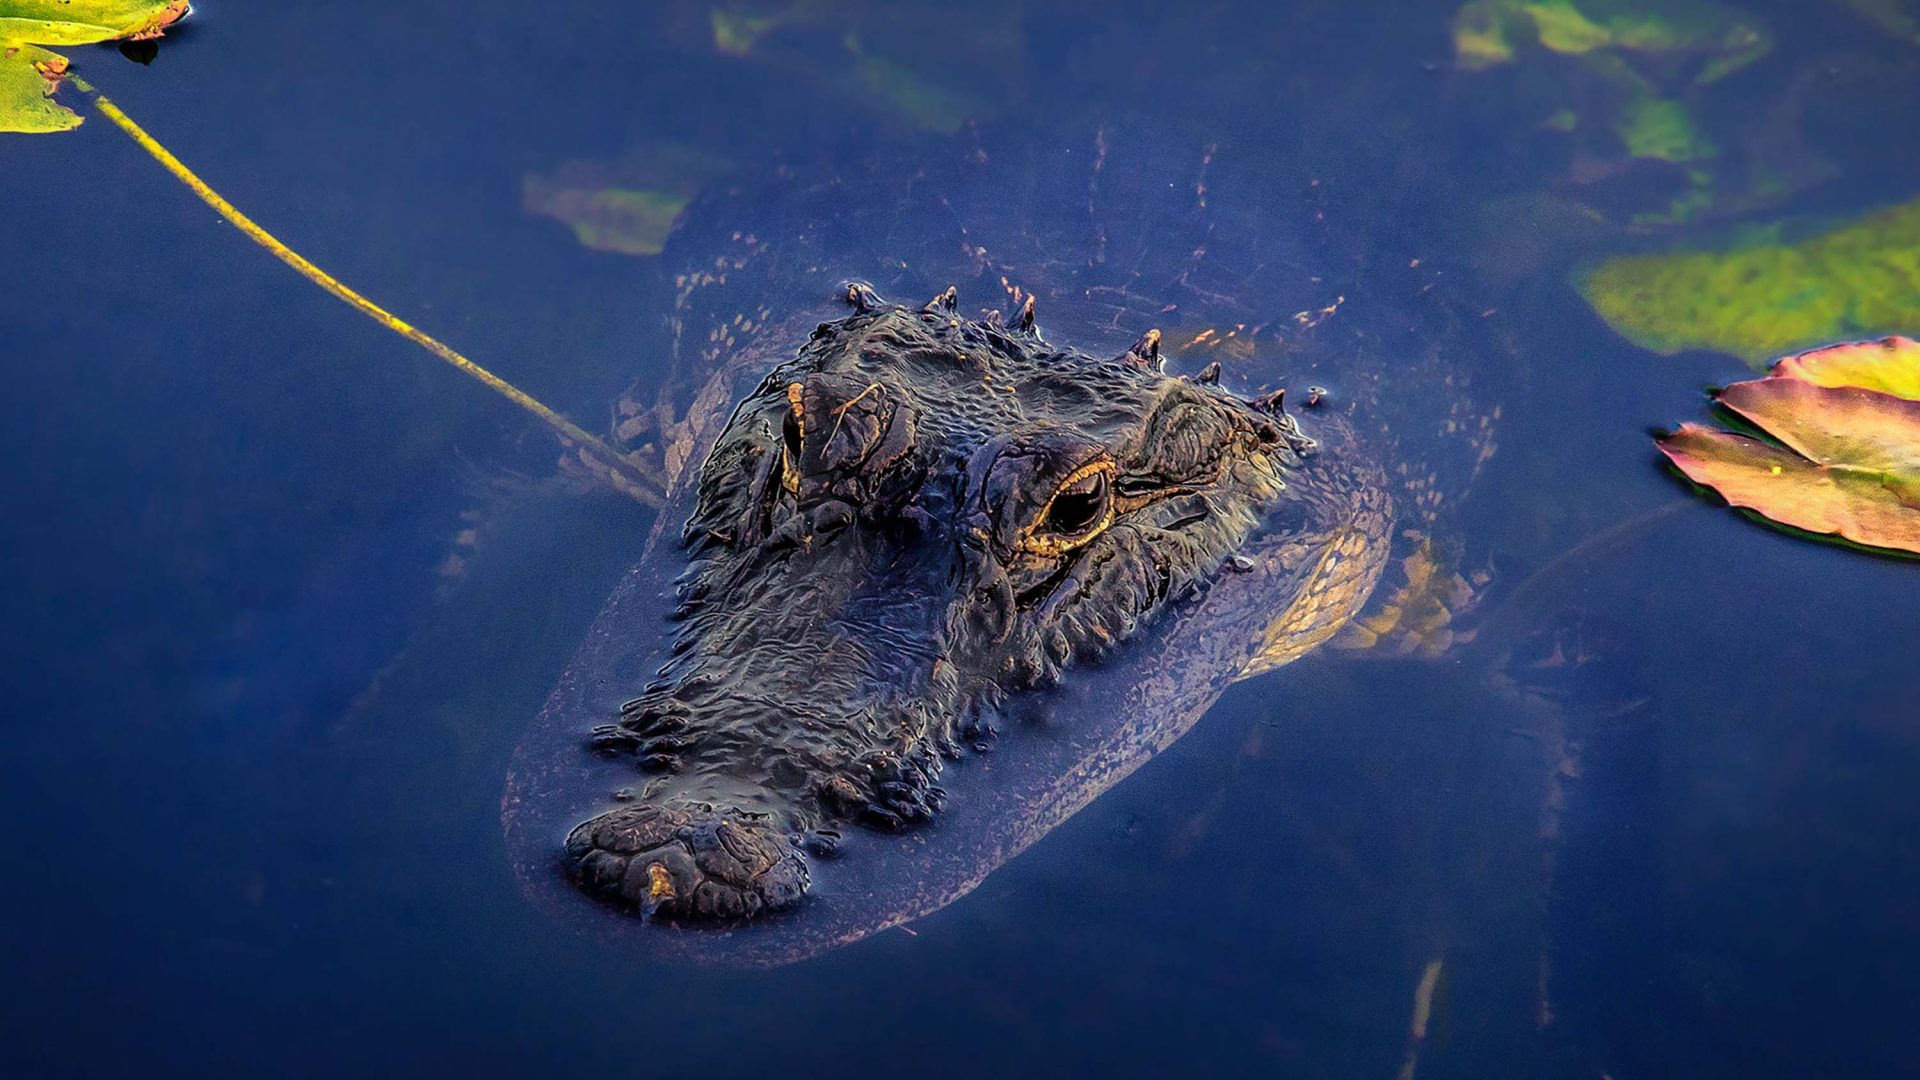 An alligator has its head sticking out of the water in the Everglades.